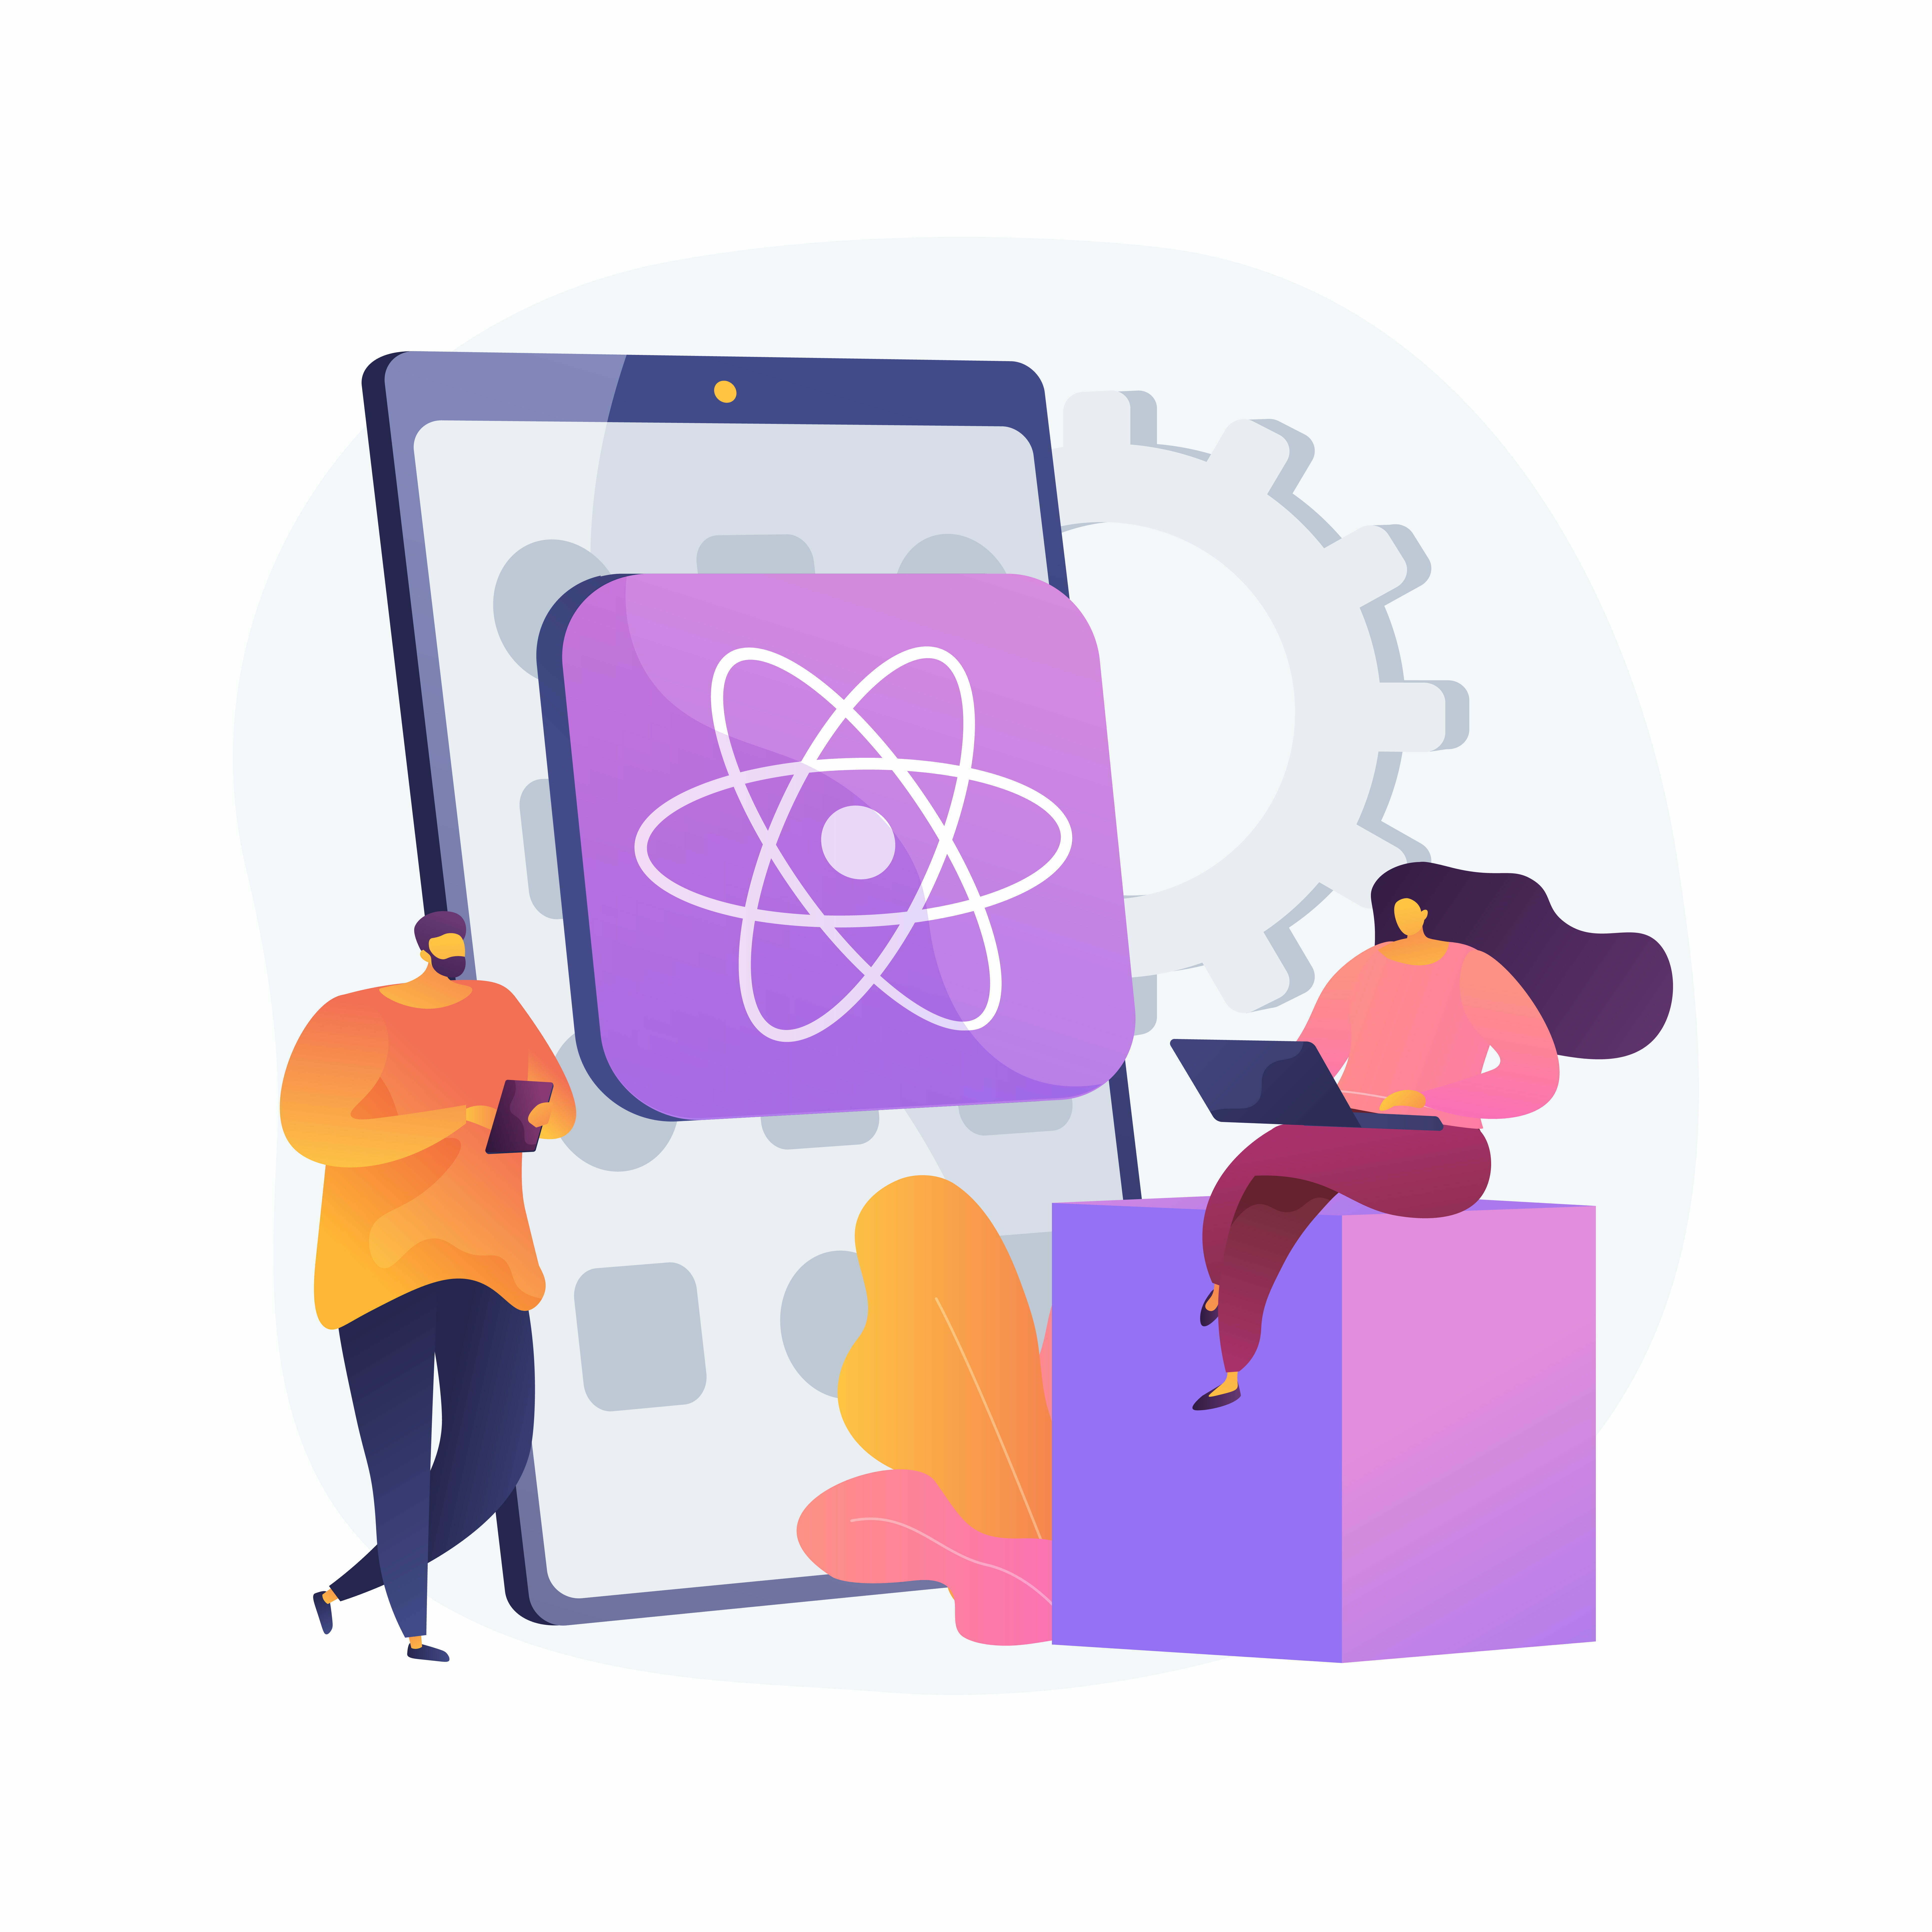 How to Get Better Performance out of Your React Native App